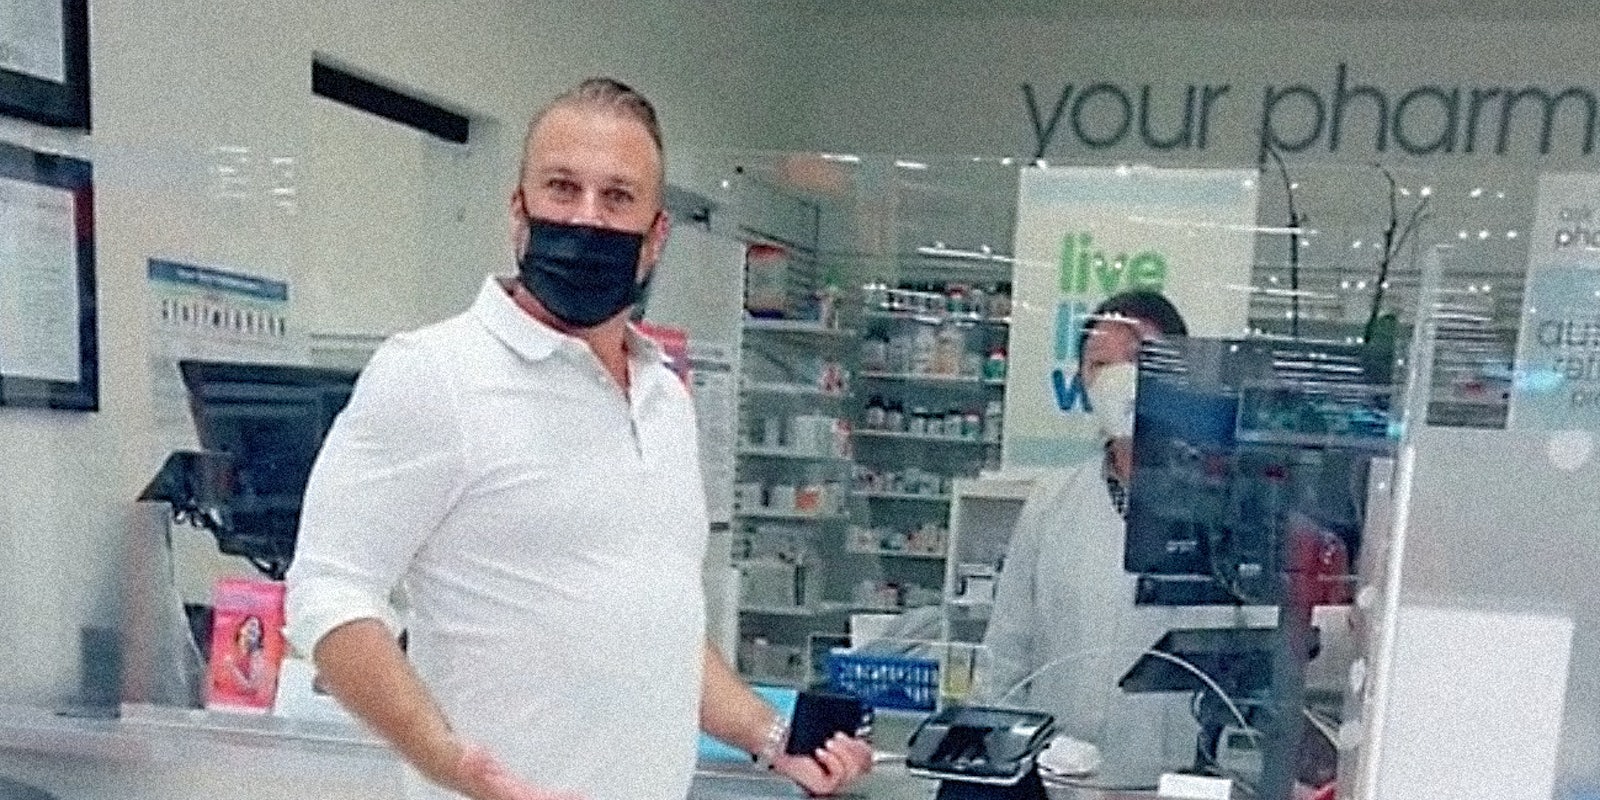 A man at a pharmacy looking into camera.